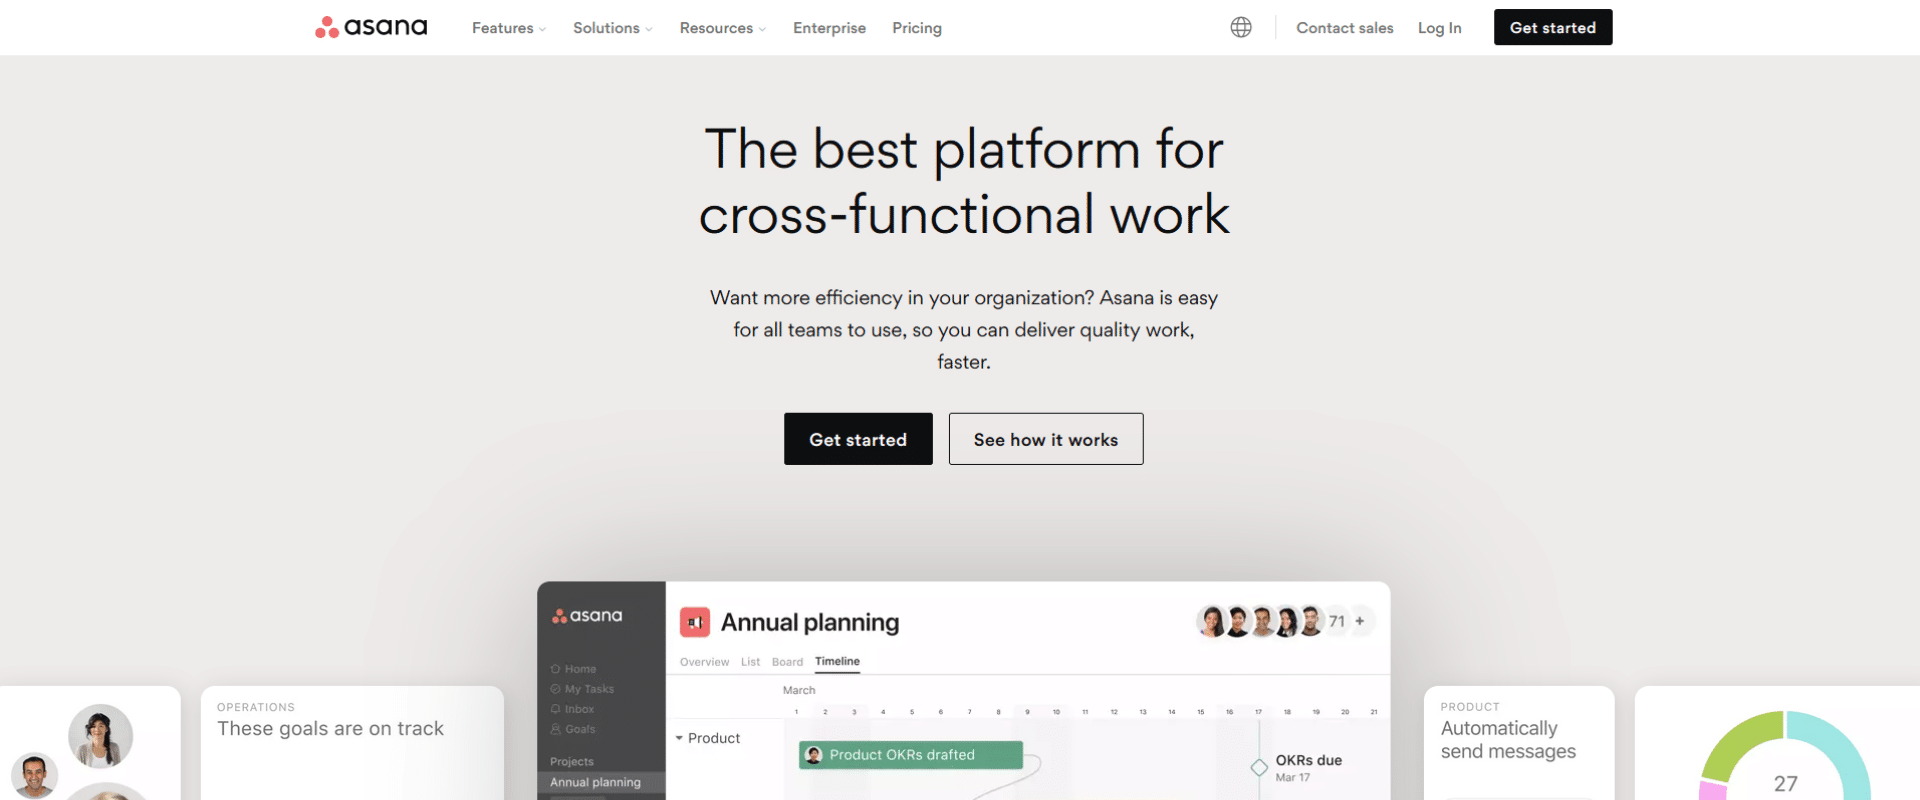 A website page showing a cross functional work platform.